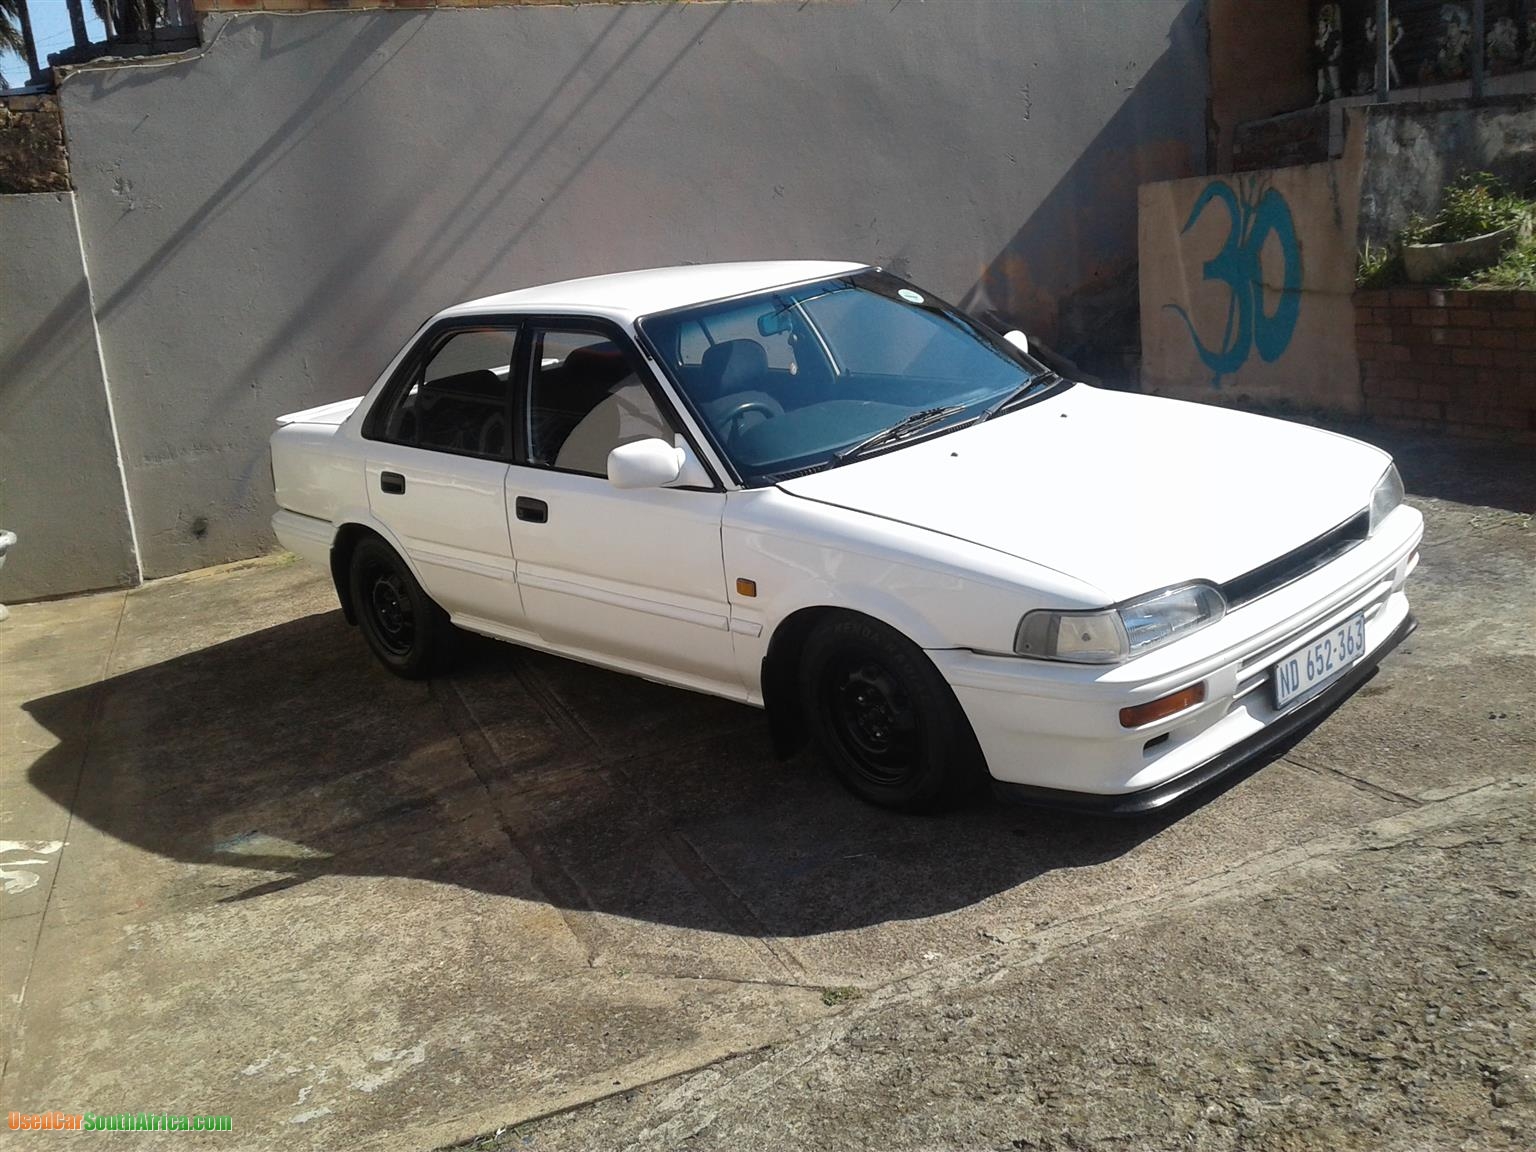 1988 Toyota Corolla 1.6 used car for sale in Edenvale Gauteng South